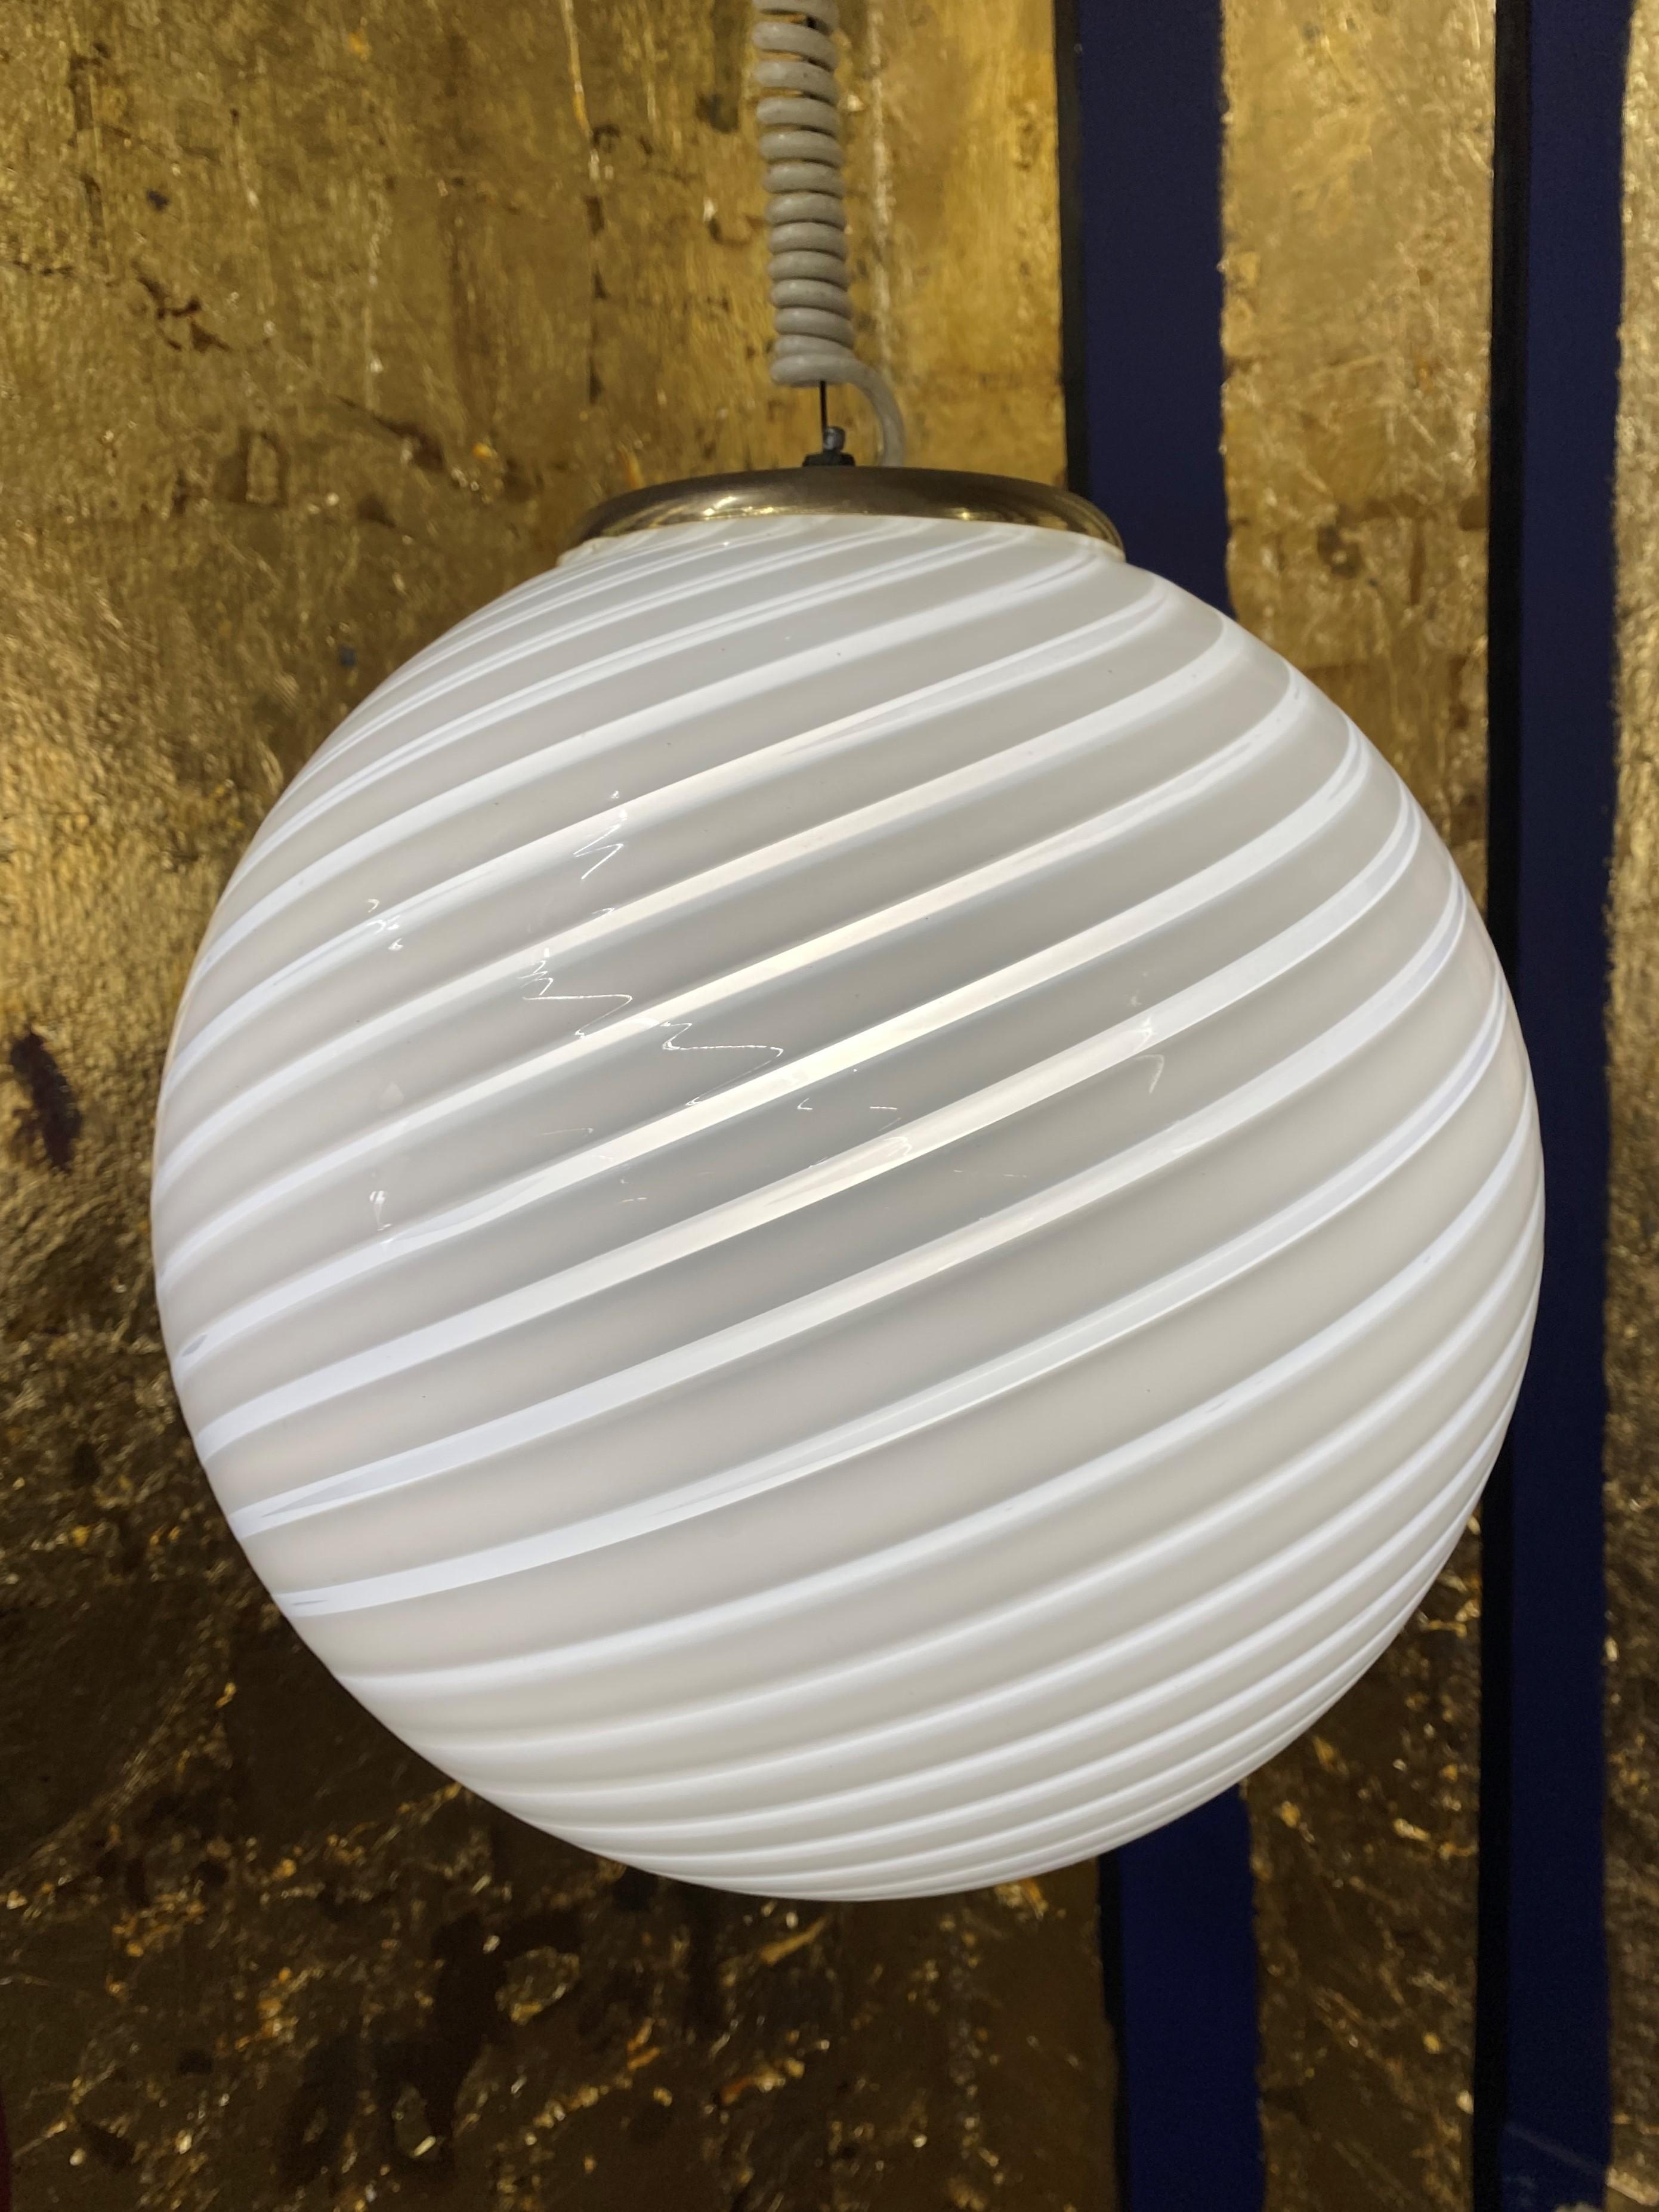 Space Age pendant light manufactured in white and clear striped hand blown Murano glass, attributed to Venini, circa 1970.
Measures: Diameter is 33cm.
Height is 60cm but can be easily adjusted to measure.
The coiled cable is original to the lamp